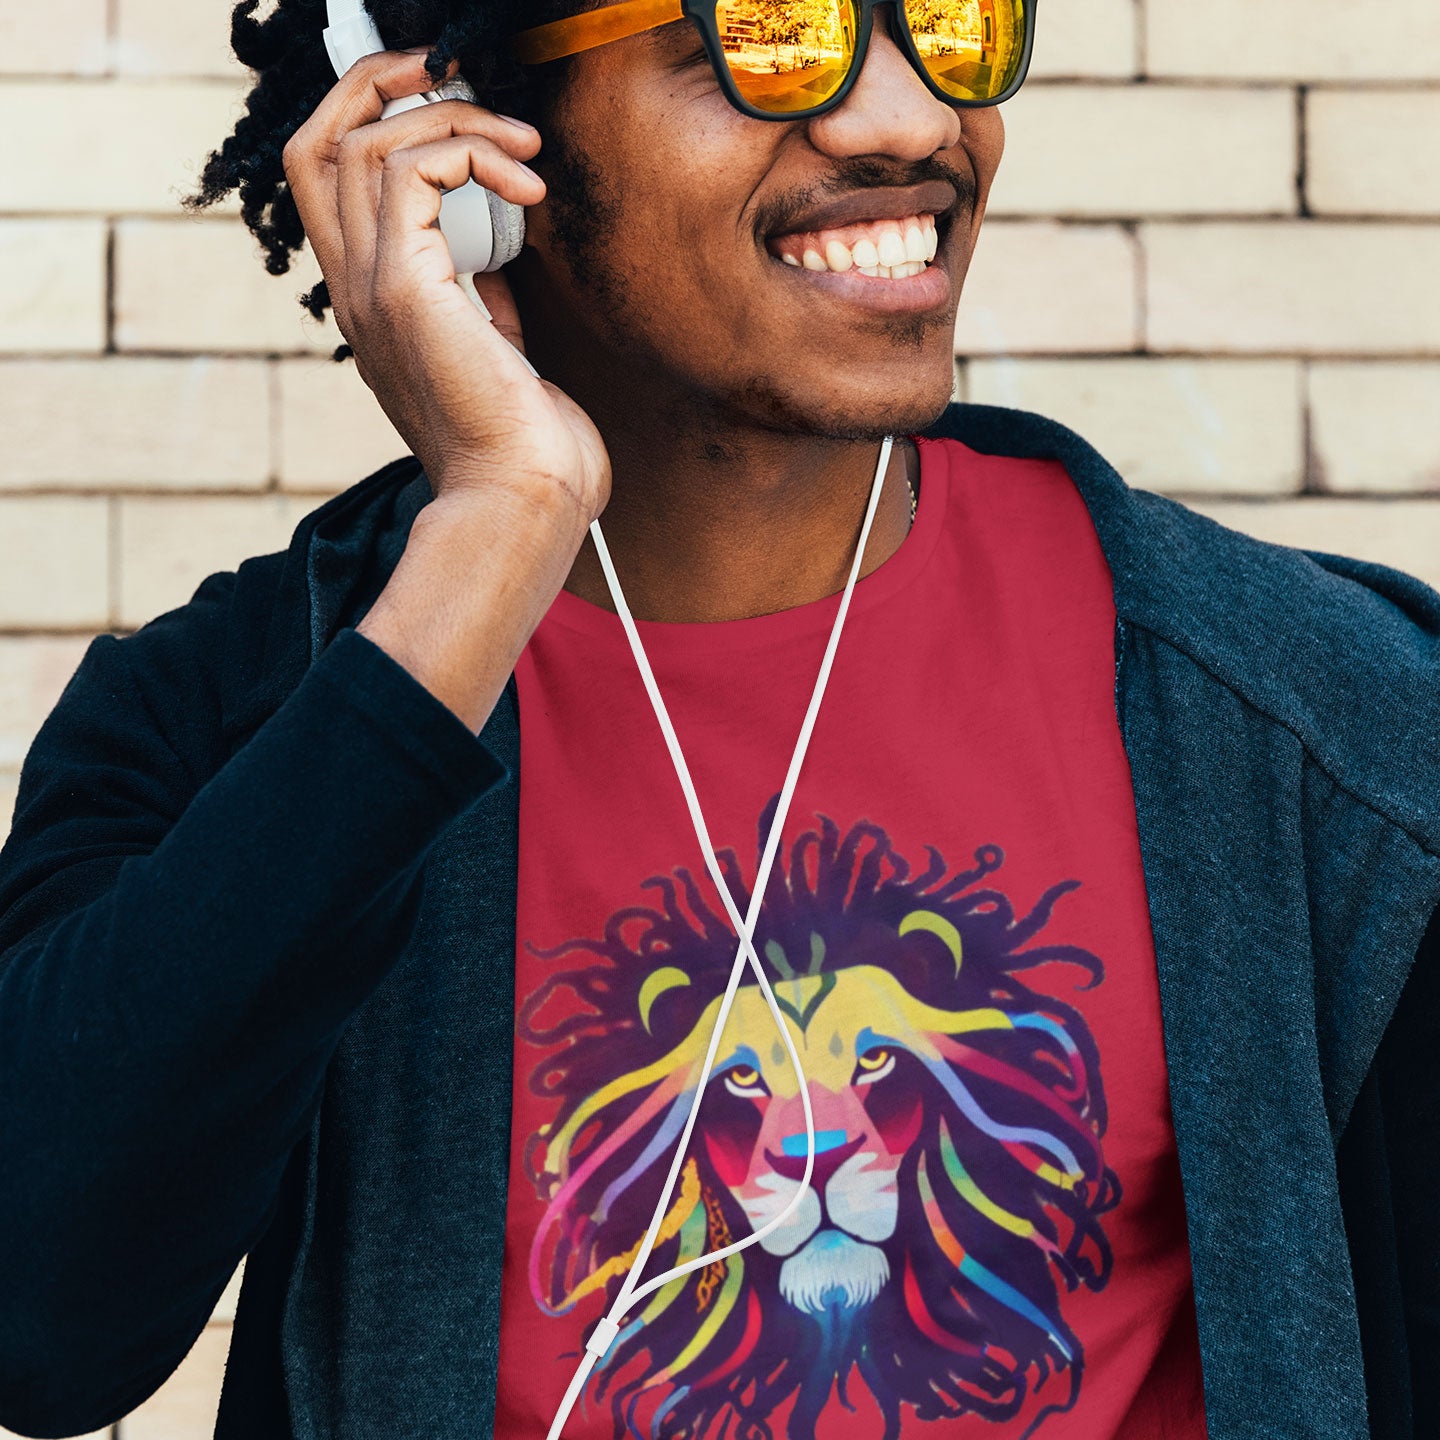 A guy listening to music wearing a red t-shirt with a colourful lion with dreadlocks print